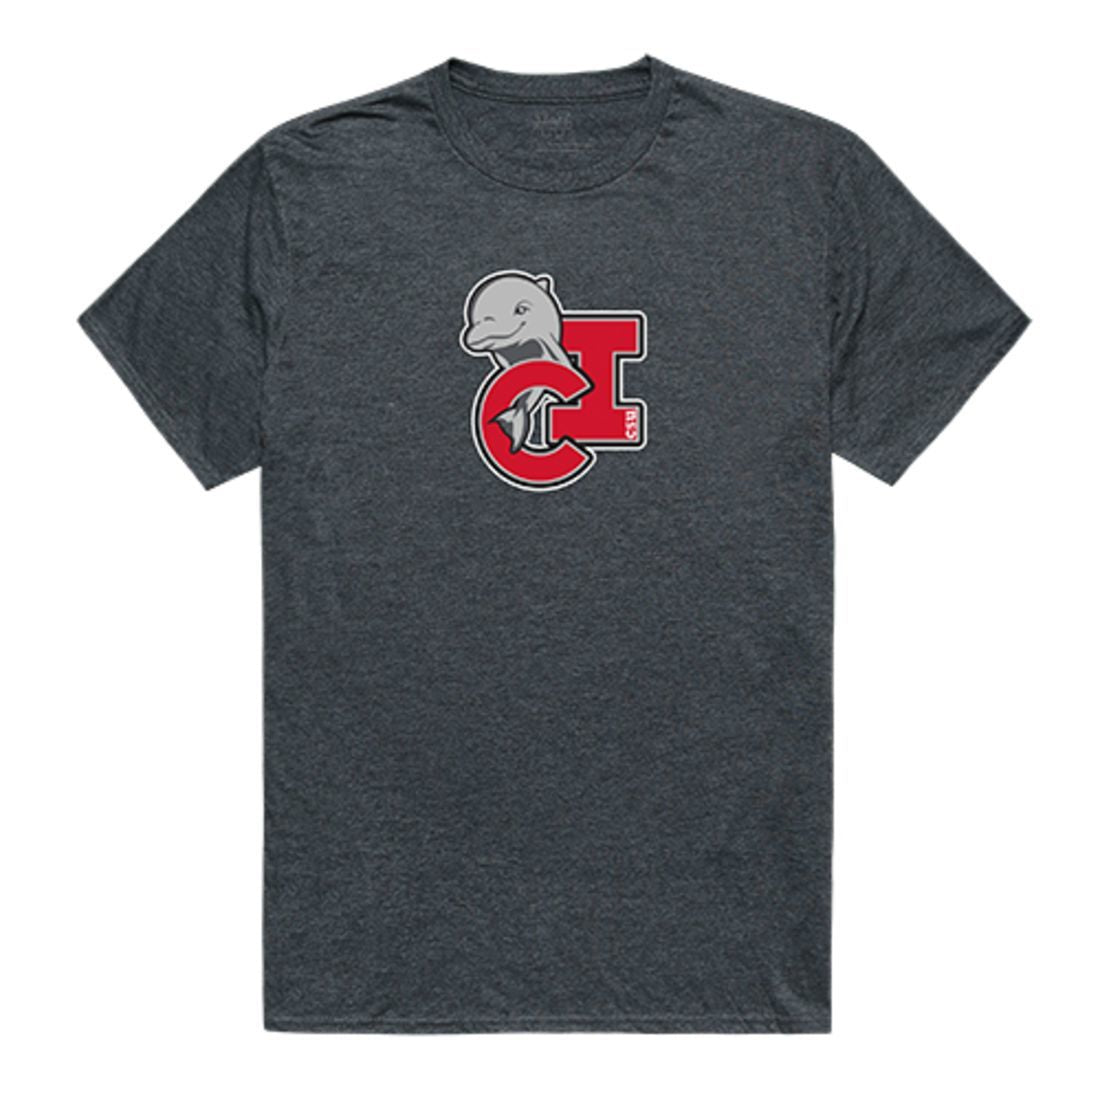 CSUCI CalIfornia State University Channel Islands The Dolphins Cinder T-Shirt Heather Charcoal-Campus-Wardrobe